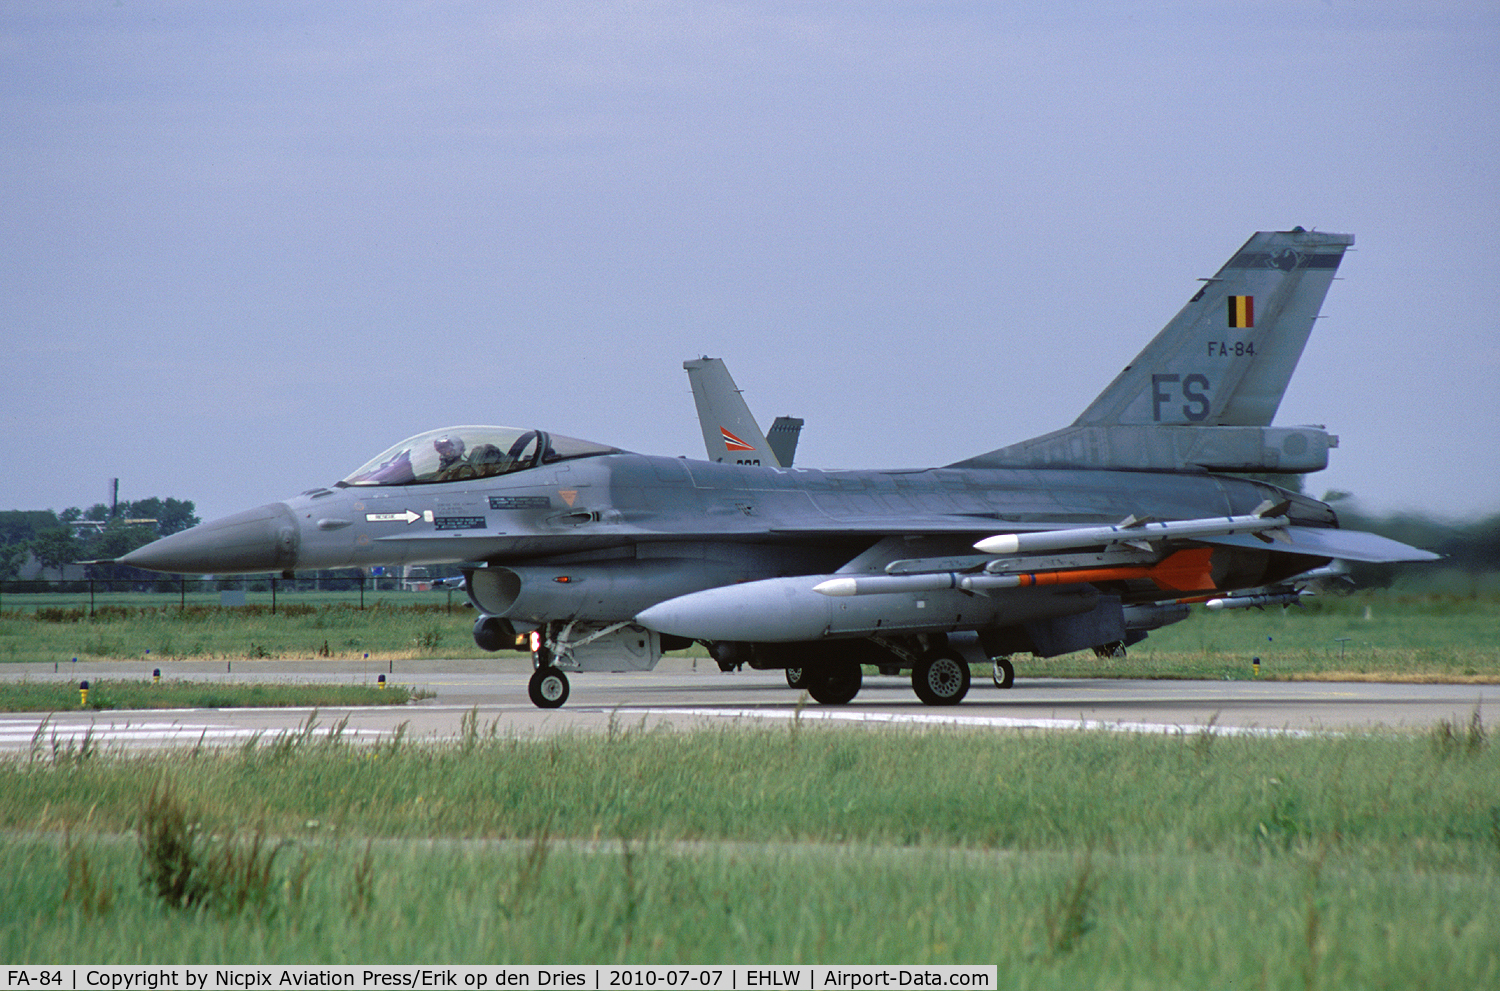 FA-84, 1980 SABCA F-16AM Fighting Falcon C/N 6H-84, Belgium AF F-16AM FA-84 with live AMRAAMS and a tracer Sidewinder during the FWIT course 2010 at Leeuwarden AB